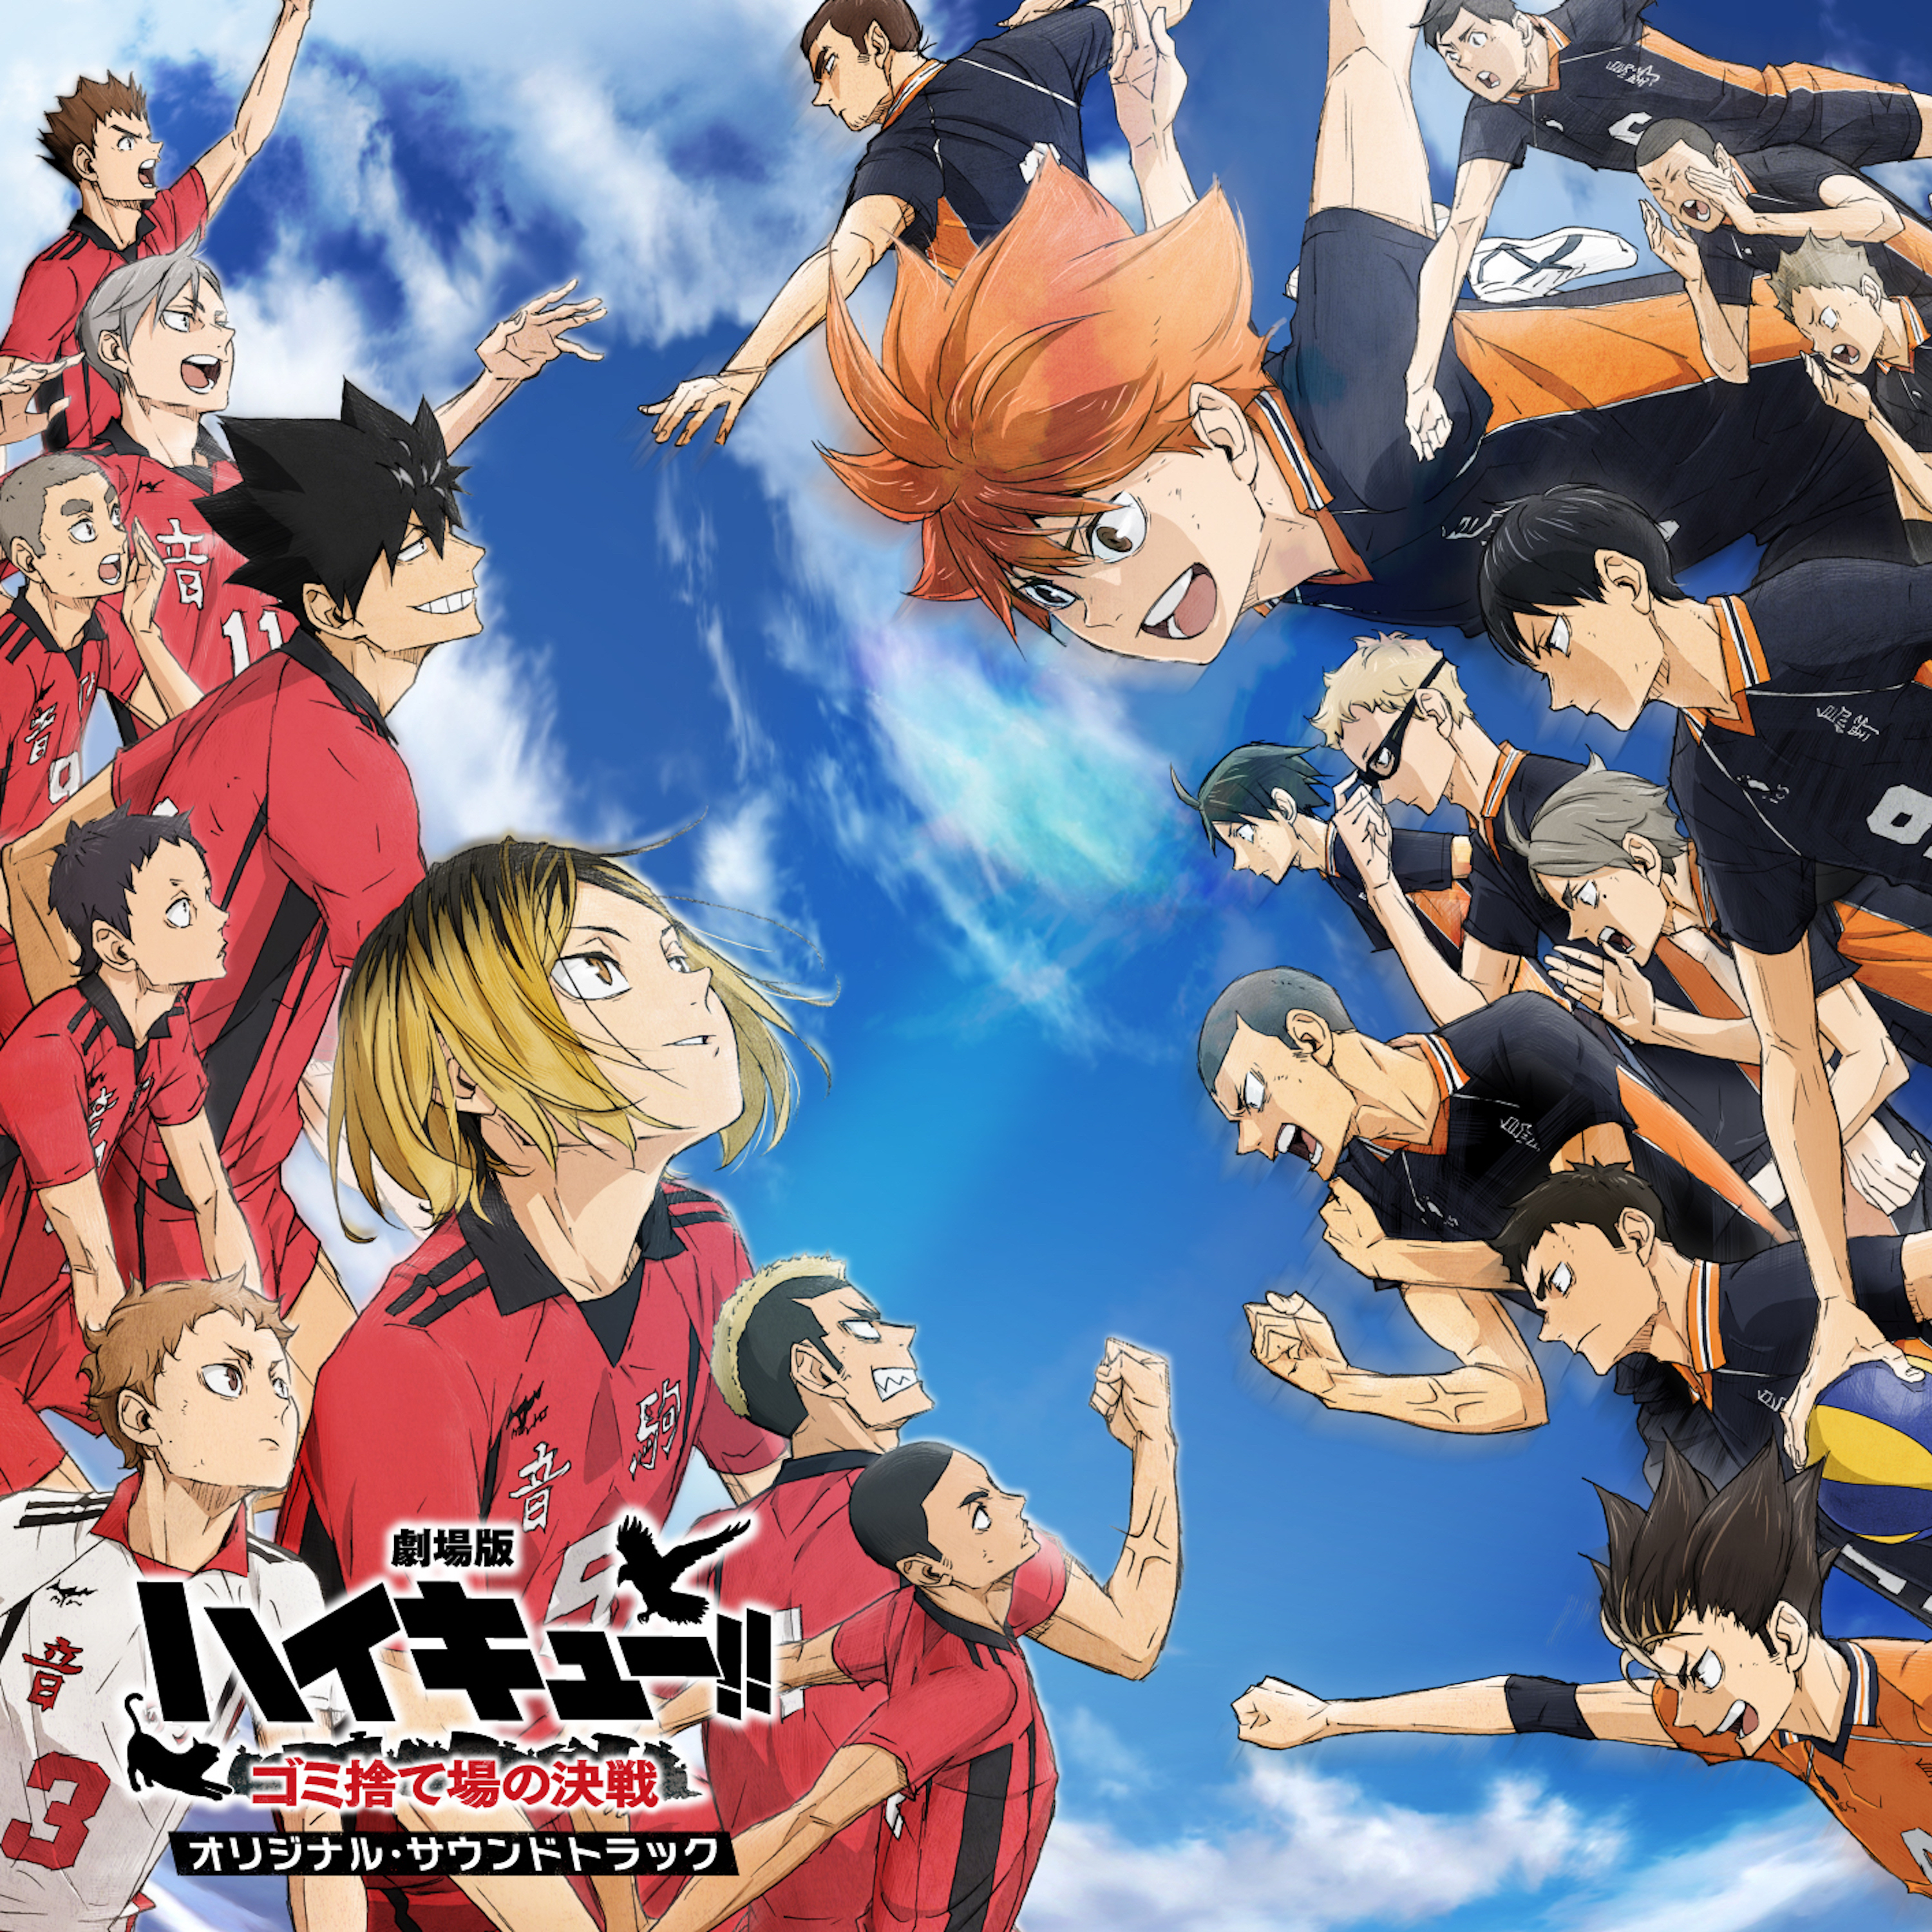 “Haikyu!!: The Dumpster Battle” Movie original sound track is distributed today!